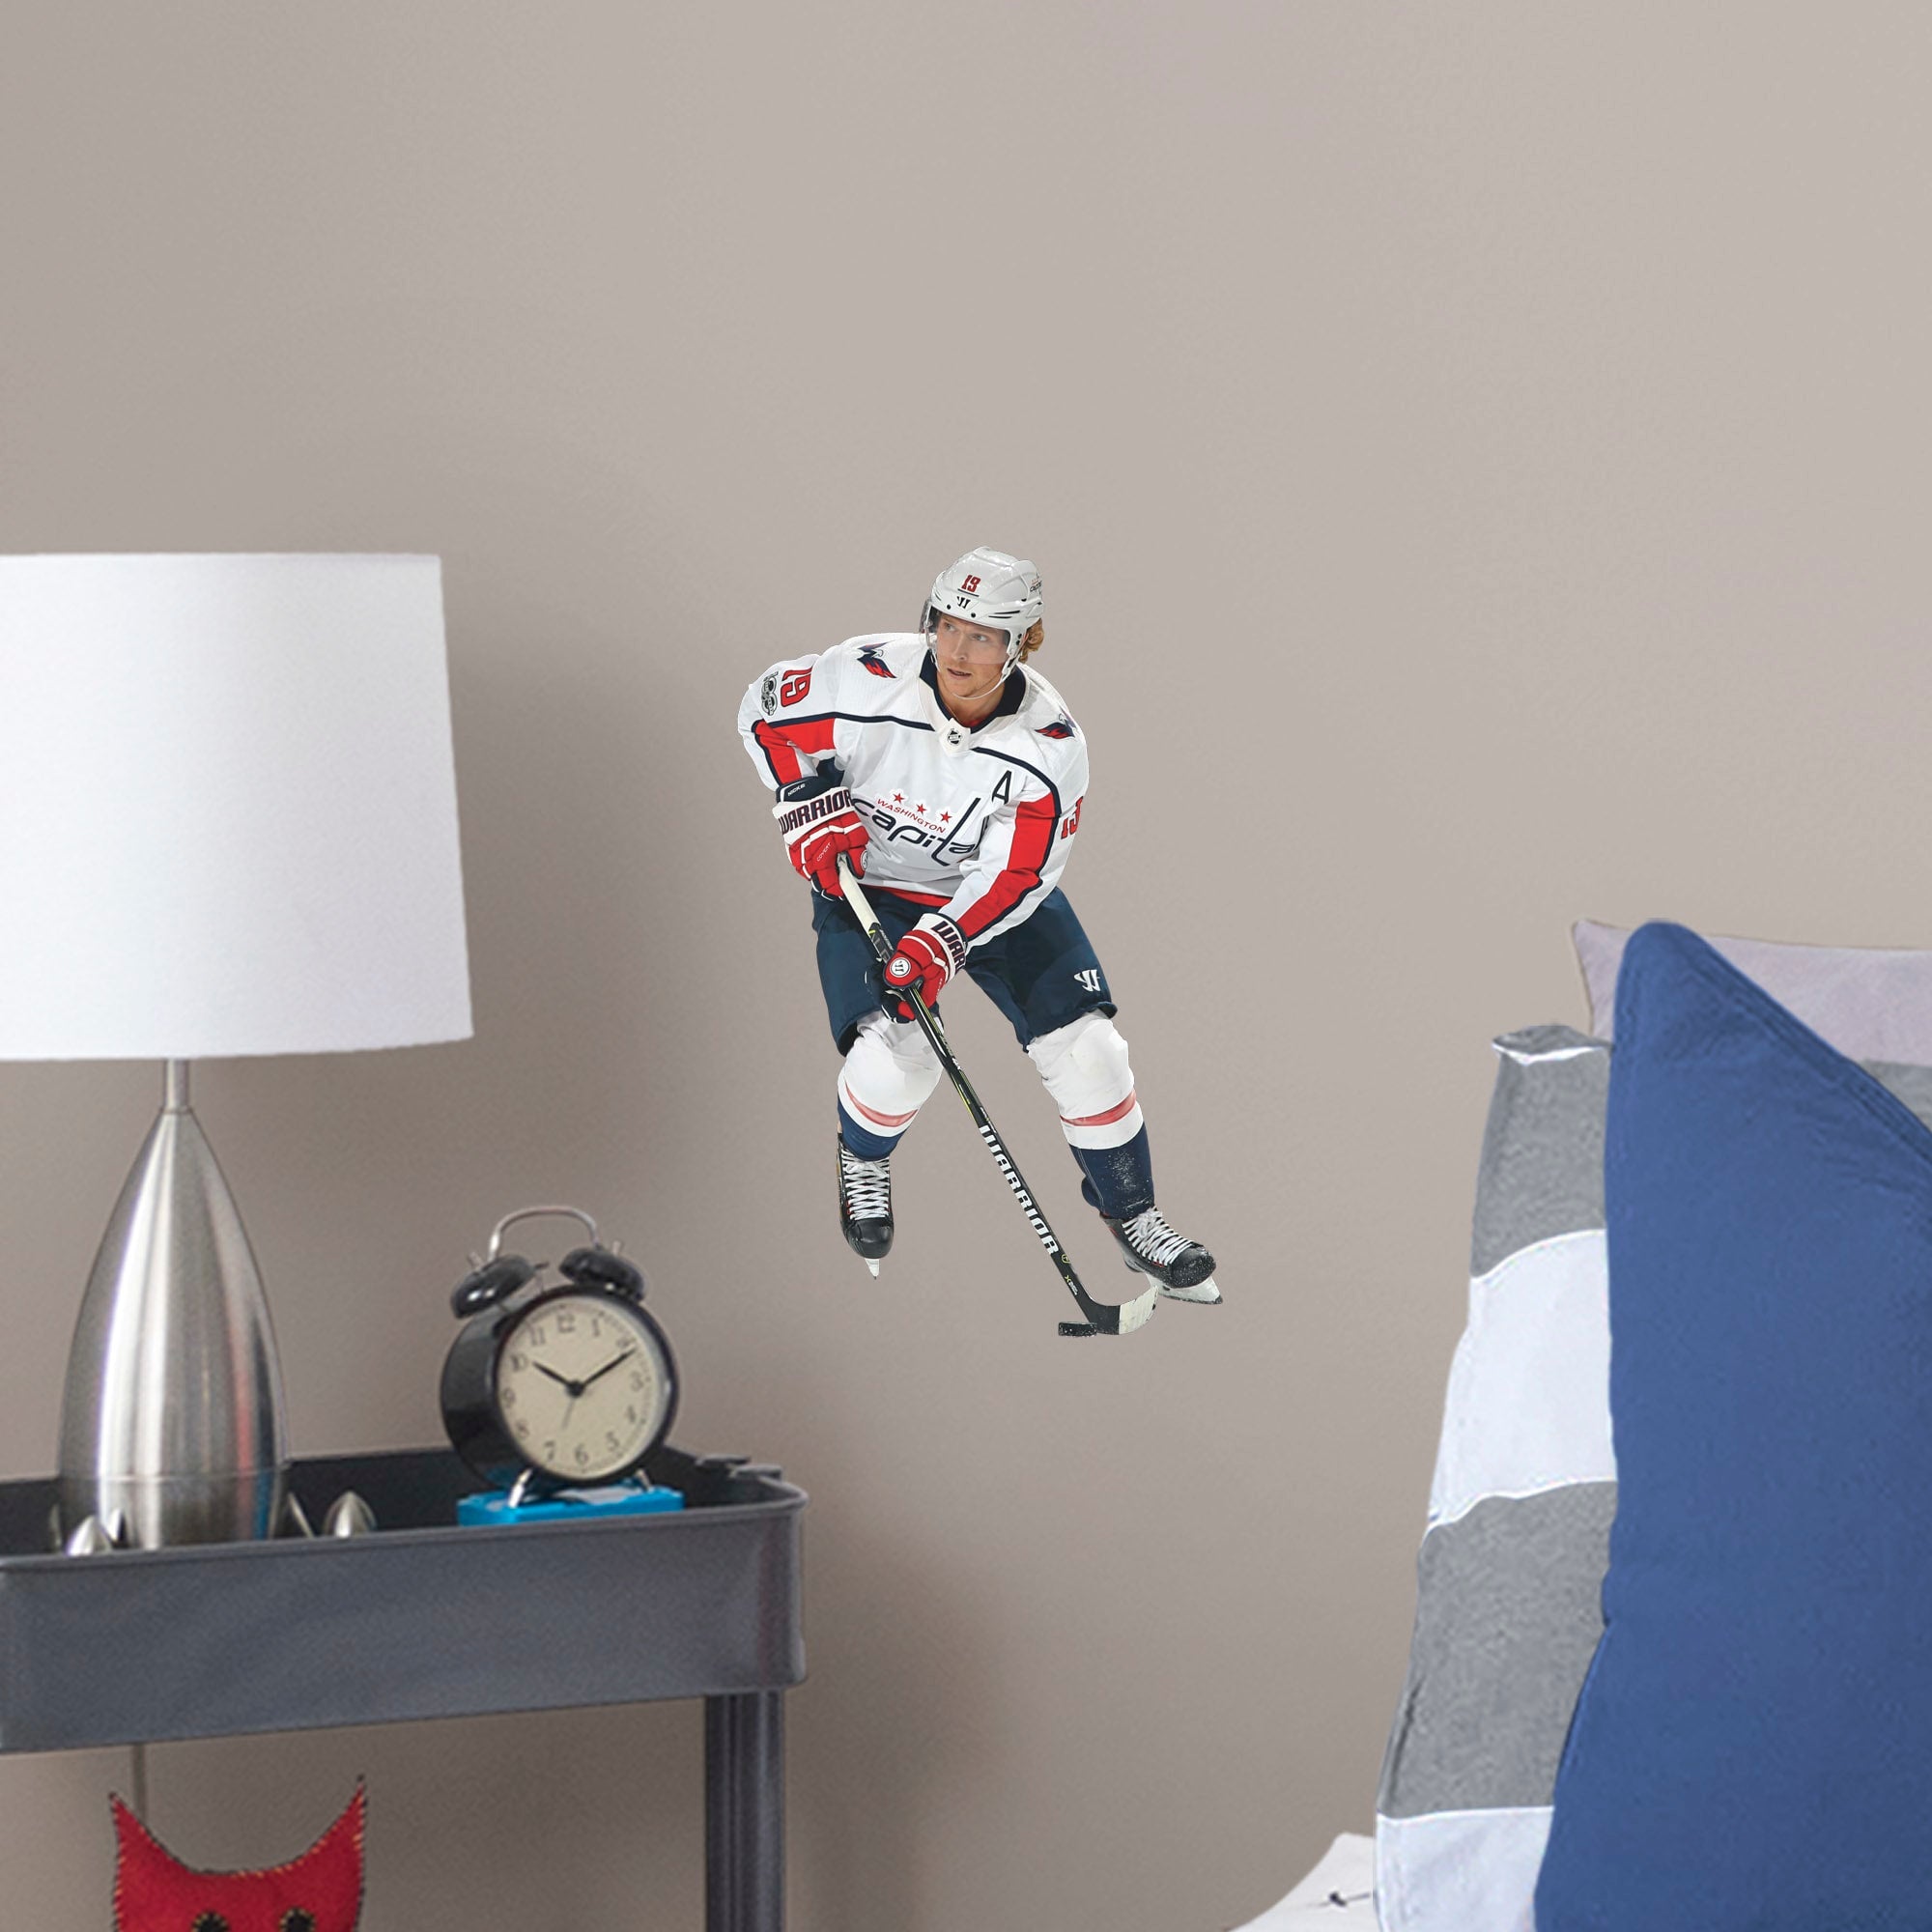 Nicklas Backstrom for Washington Capitals - Officially Licensed NHL Removable Wall Decal Large by Fathead | Vinyl